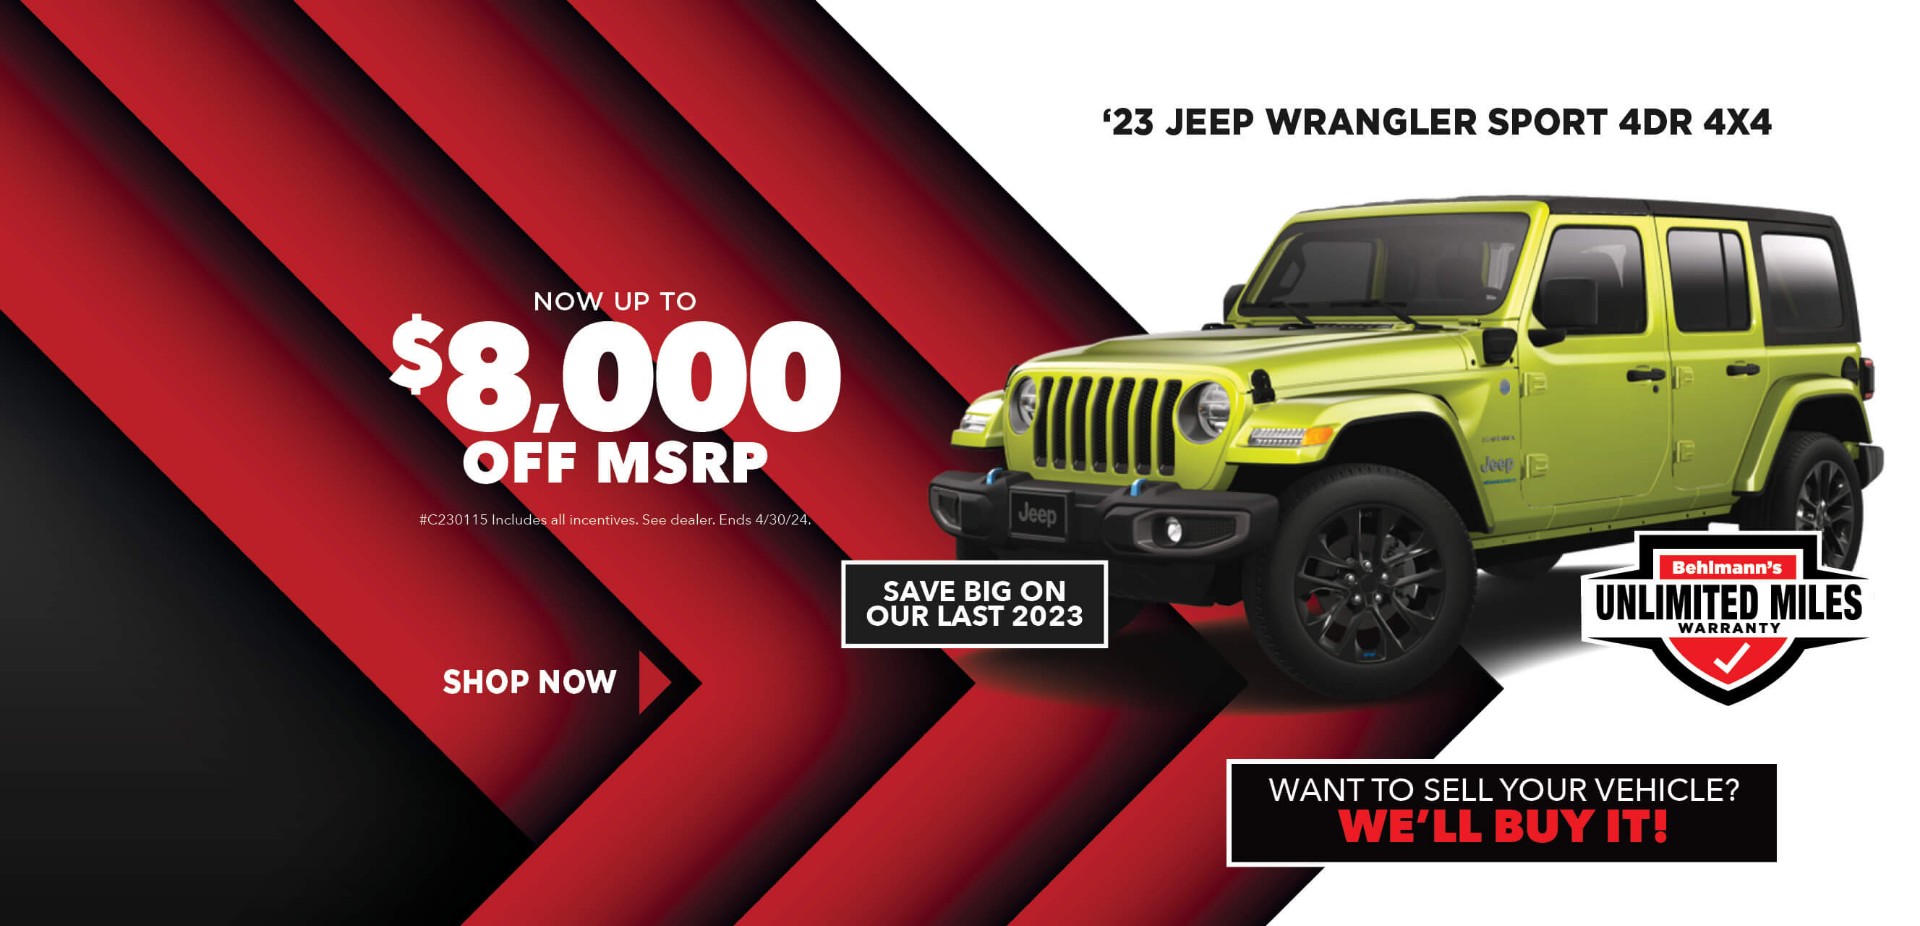 Yellow Jeep with advertising slogans: April Savings - Now up to $8,000 off MSRP on 2023 Jeep Wrangler Sport 4-door S.